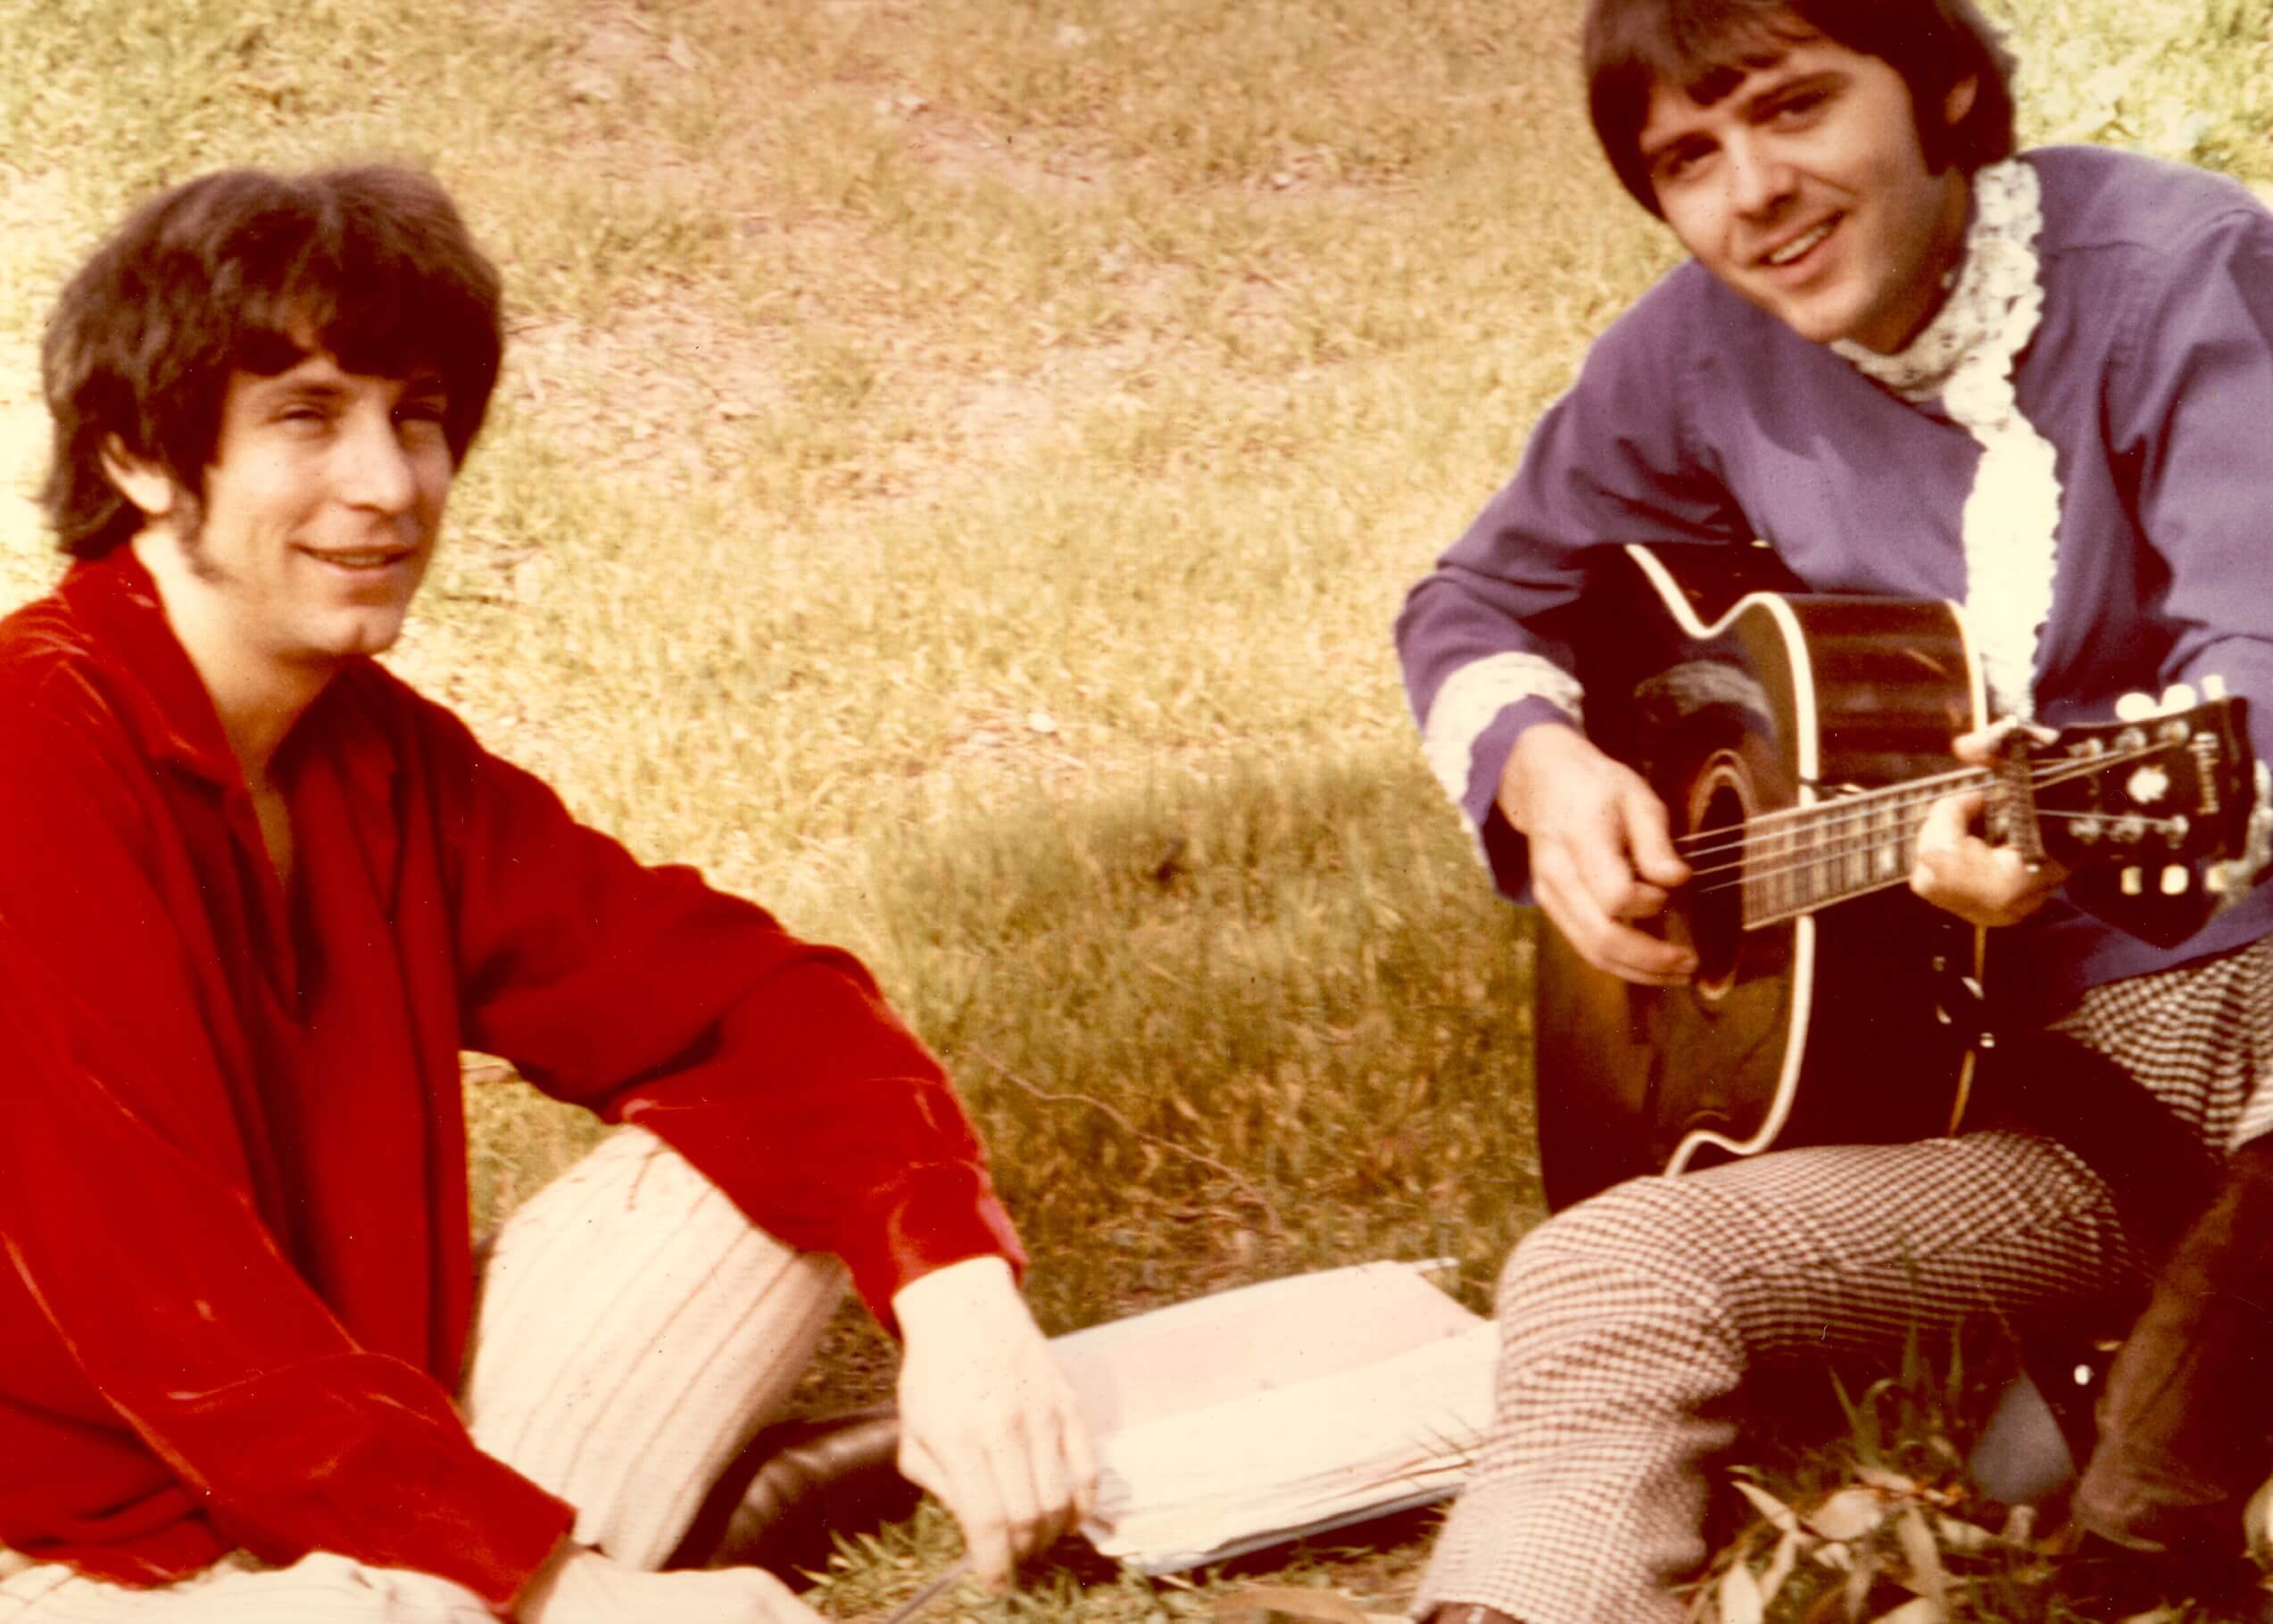 Bobby Hart and Tommy Boyce sitting on grass